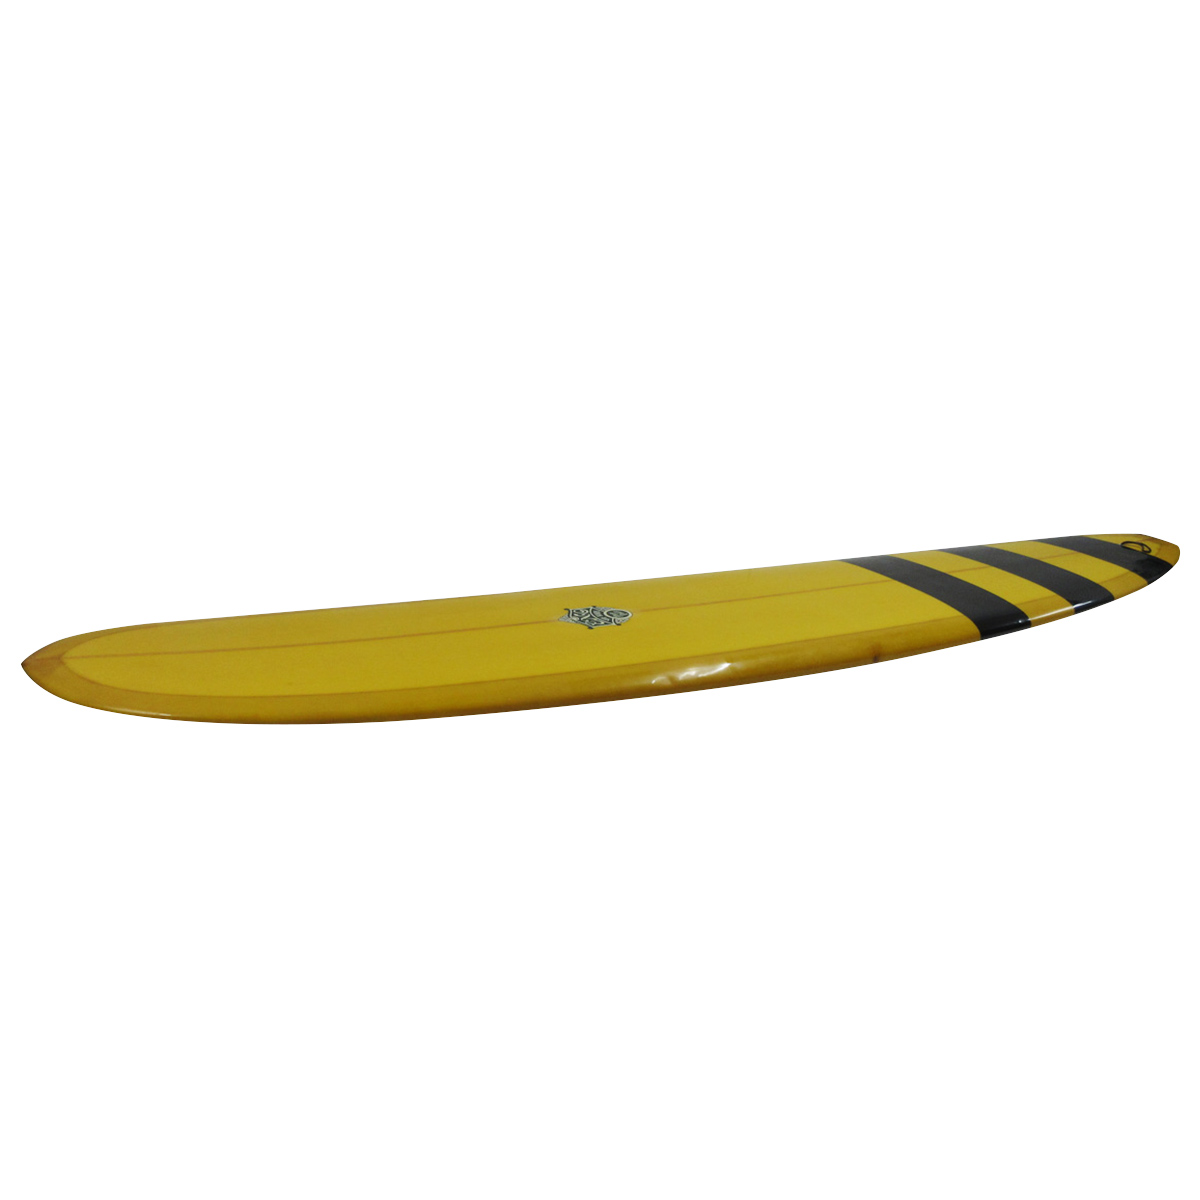 ENO Surfboards / All Round 9'0